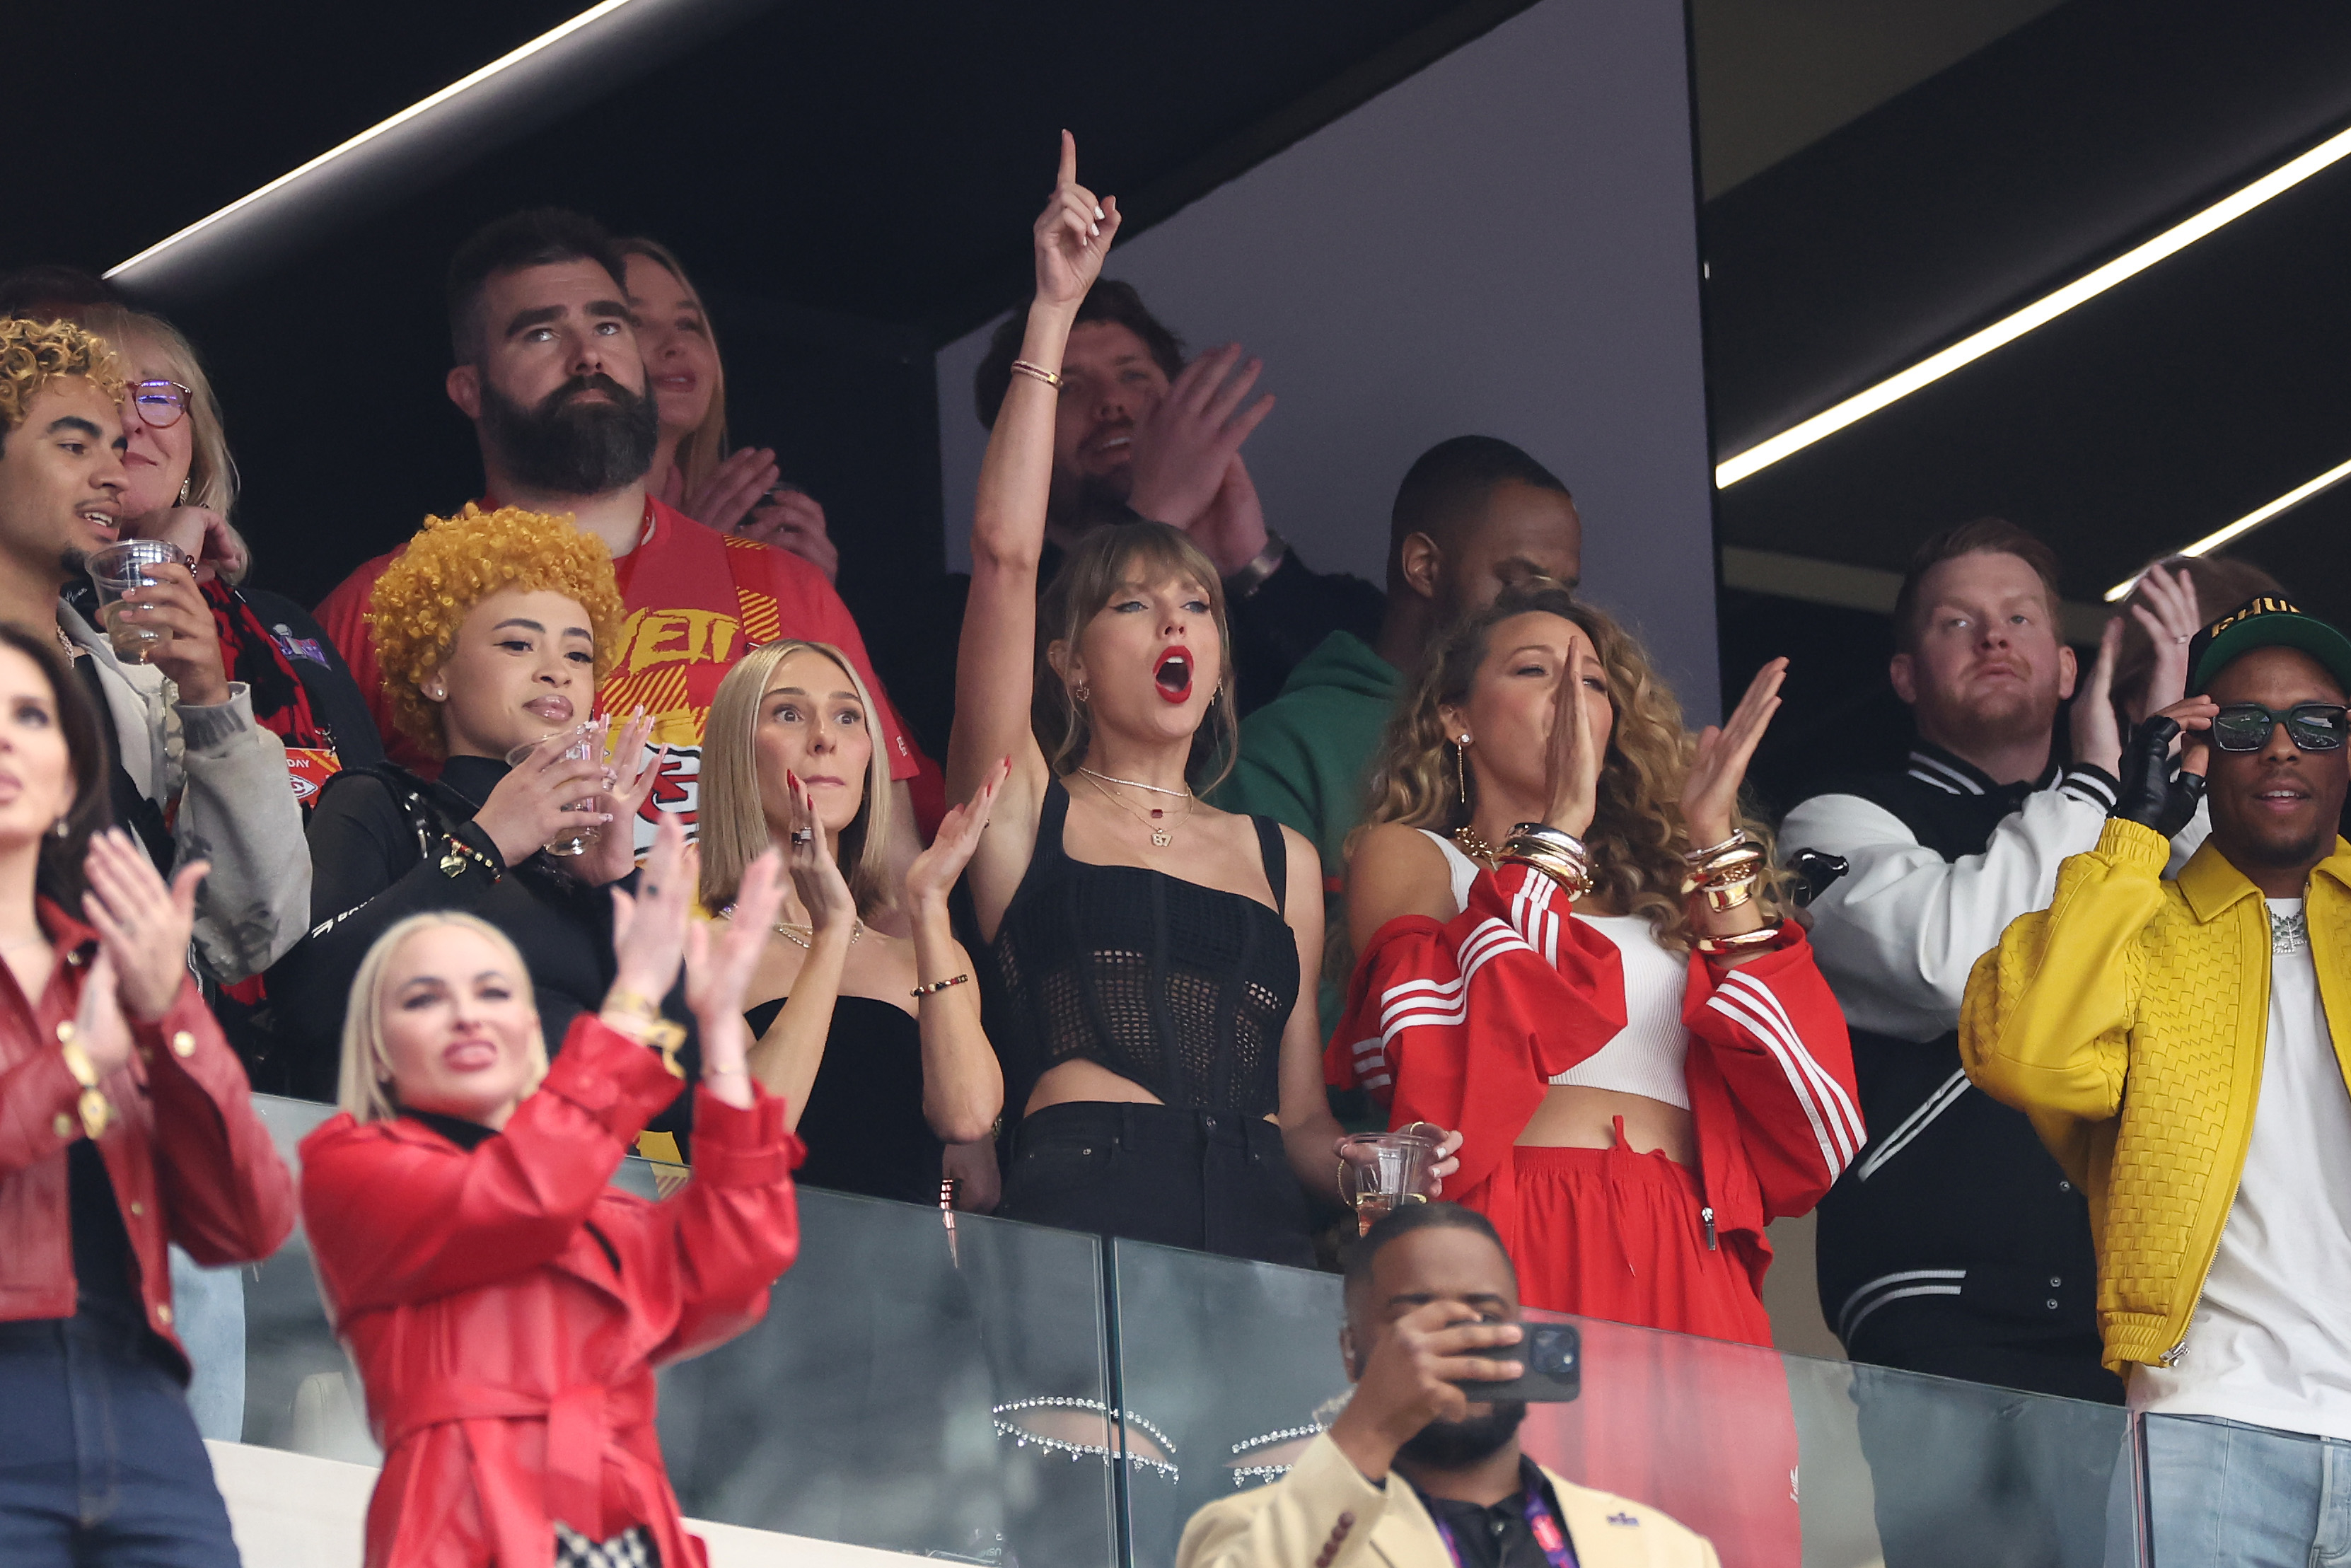 Taylor Swift passionately cheers alongside Brittany Mahomes and friends in a lively stadium box. Fans and other guests also celebrate around them